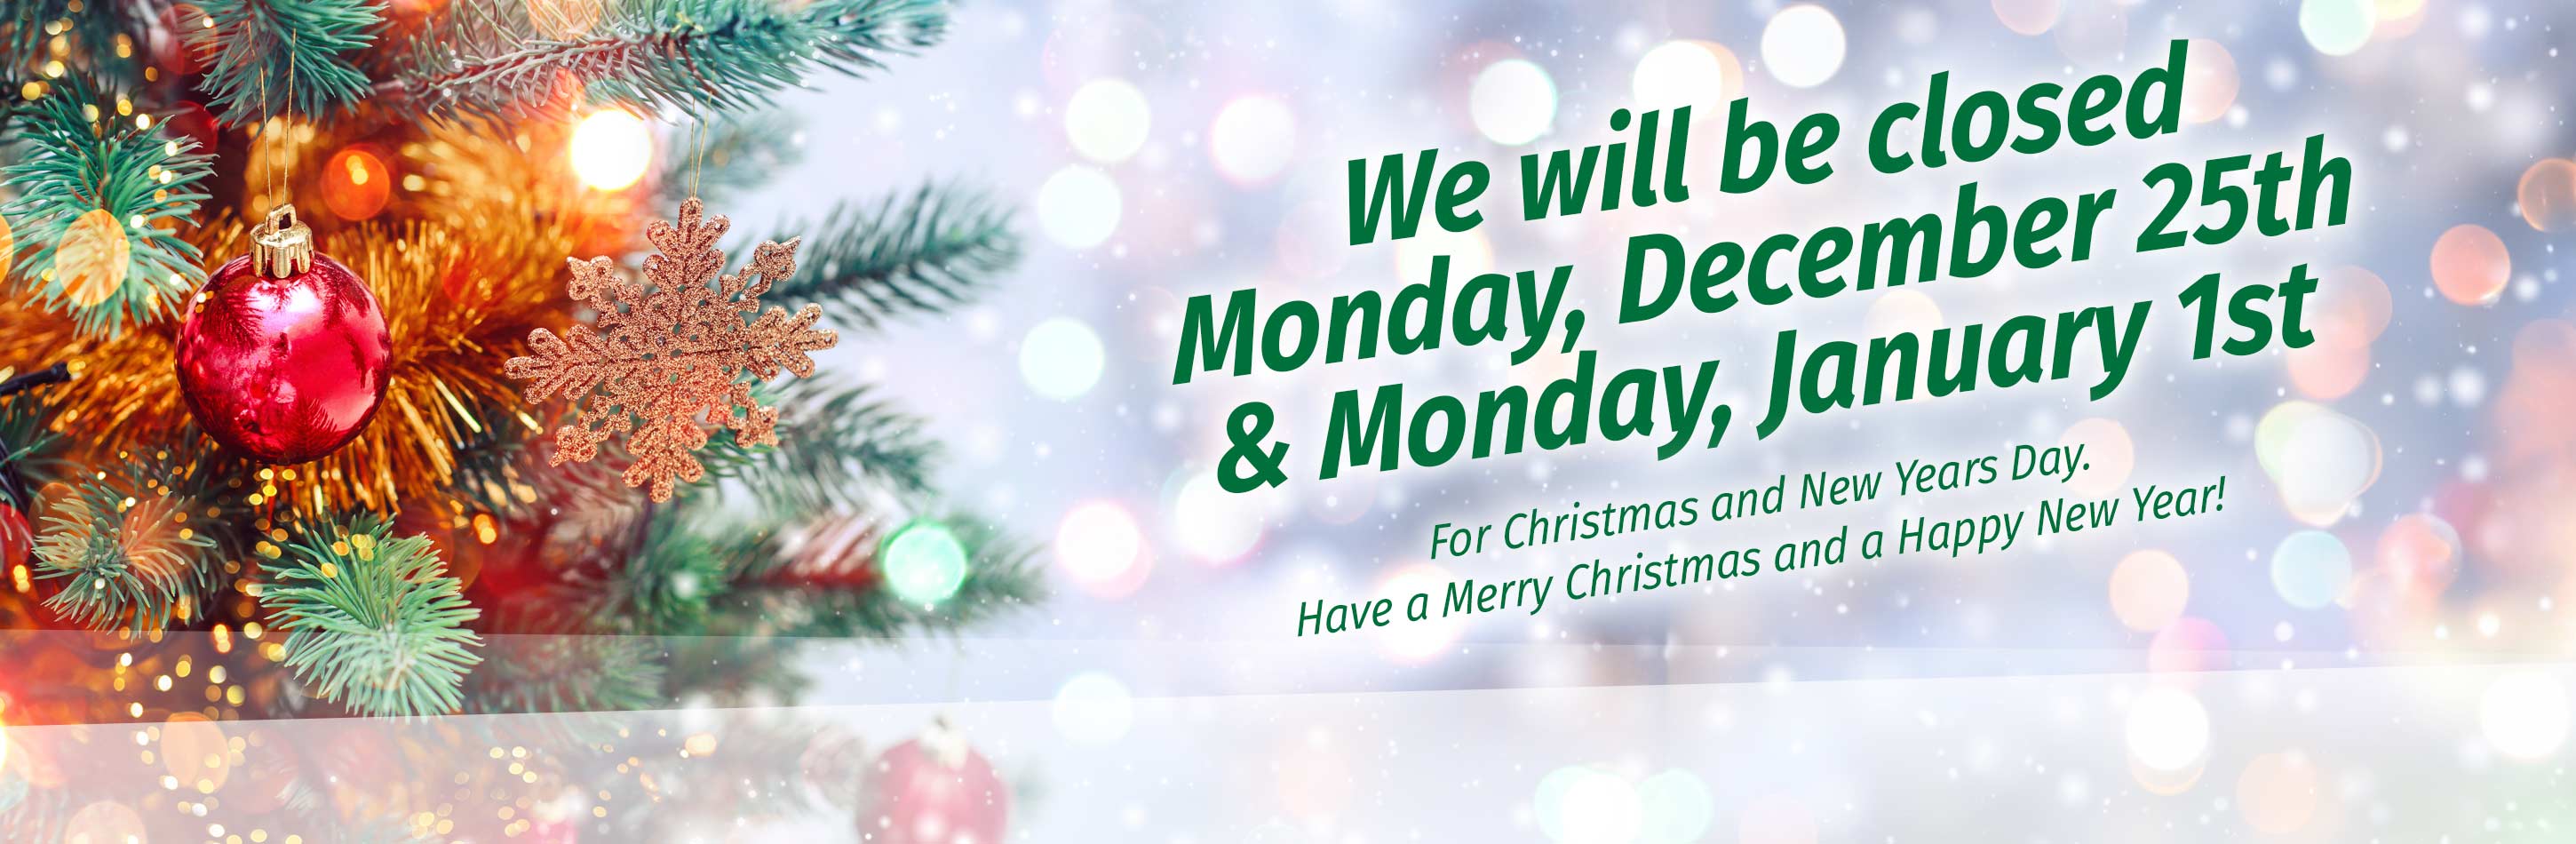 We will be closed Monday, December 25th and Monday, January 1st for Christmas and New Years Day. Have a Merry Christmas and a Happy New Year!